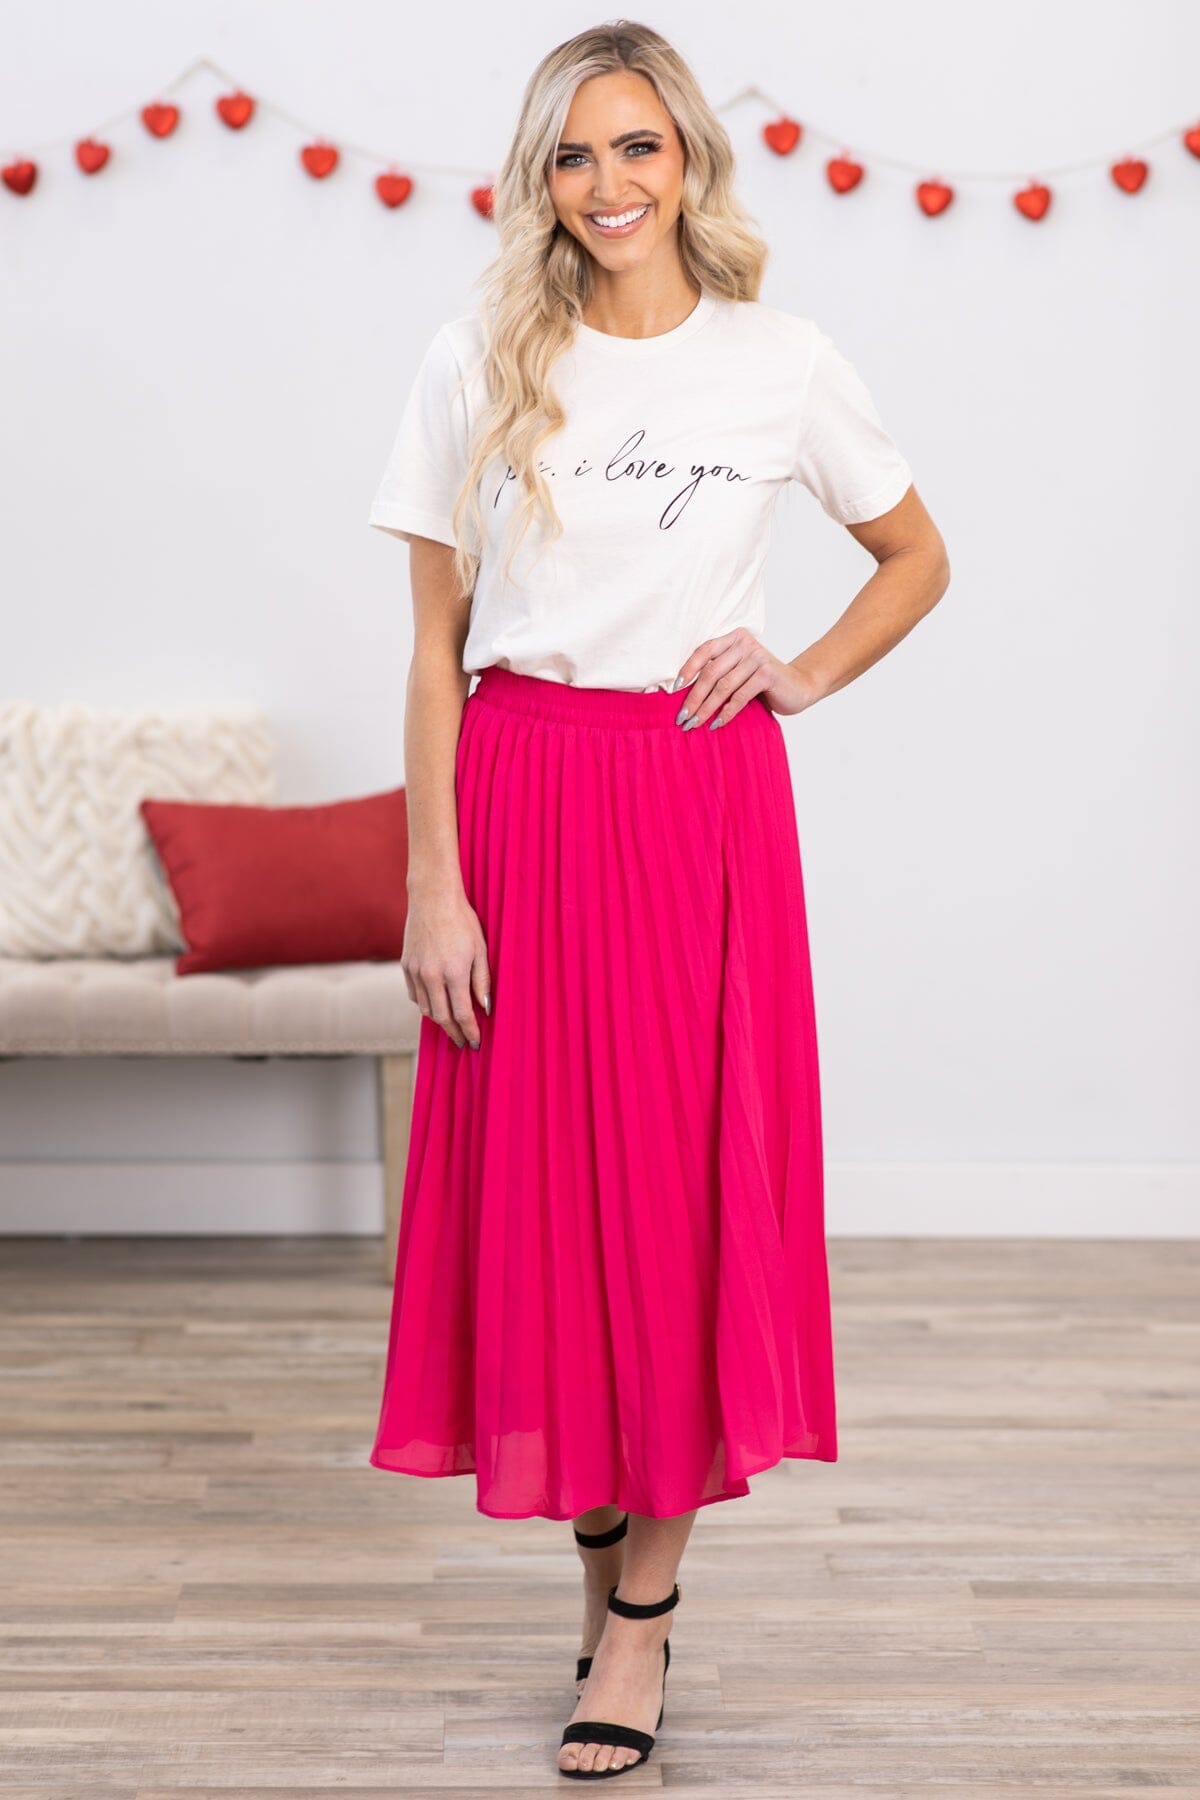 Hot Pink Accordion Pleat Midi Skirt - Filly Flair